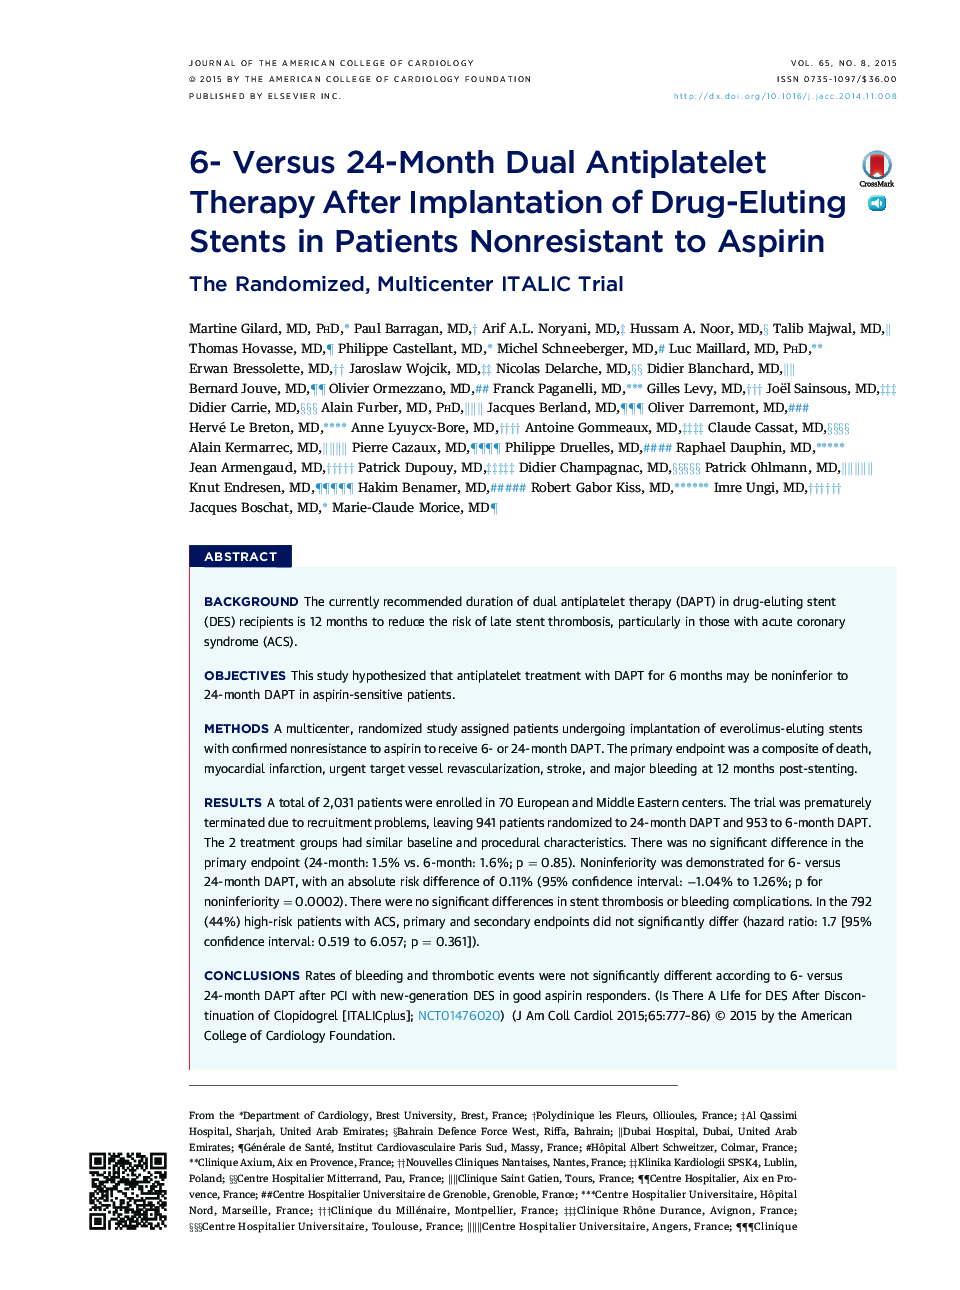 6- Versus 24-Month Dual Antiplatelet Therapy After Implantation of Drug-Eluting Stents in Patients Nonresistant to Aspirin: The Randomized, Multicenter ITALIC Trial